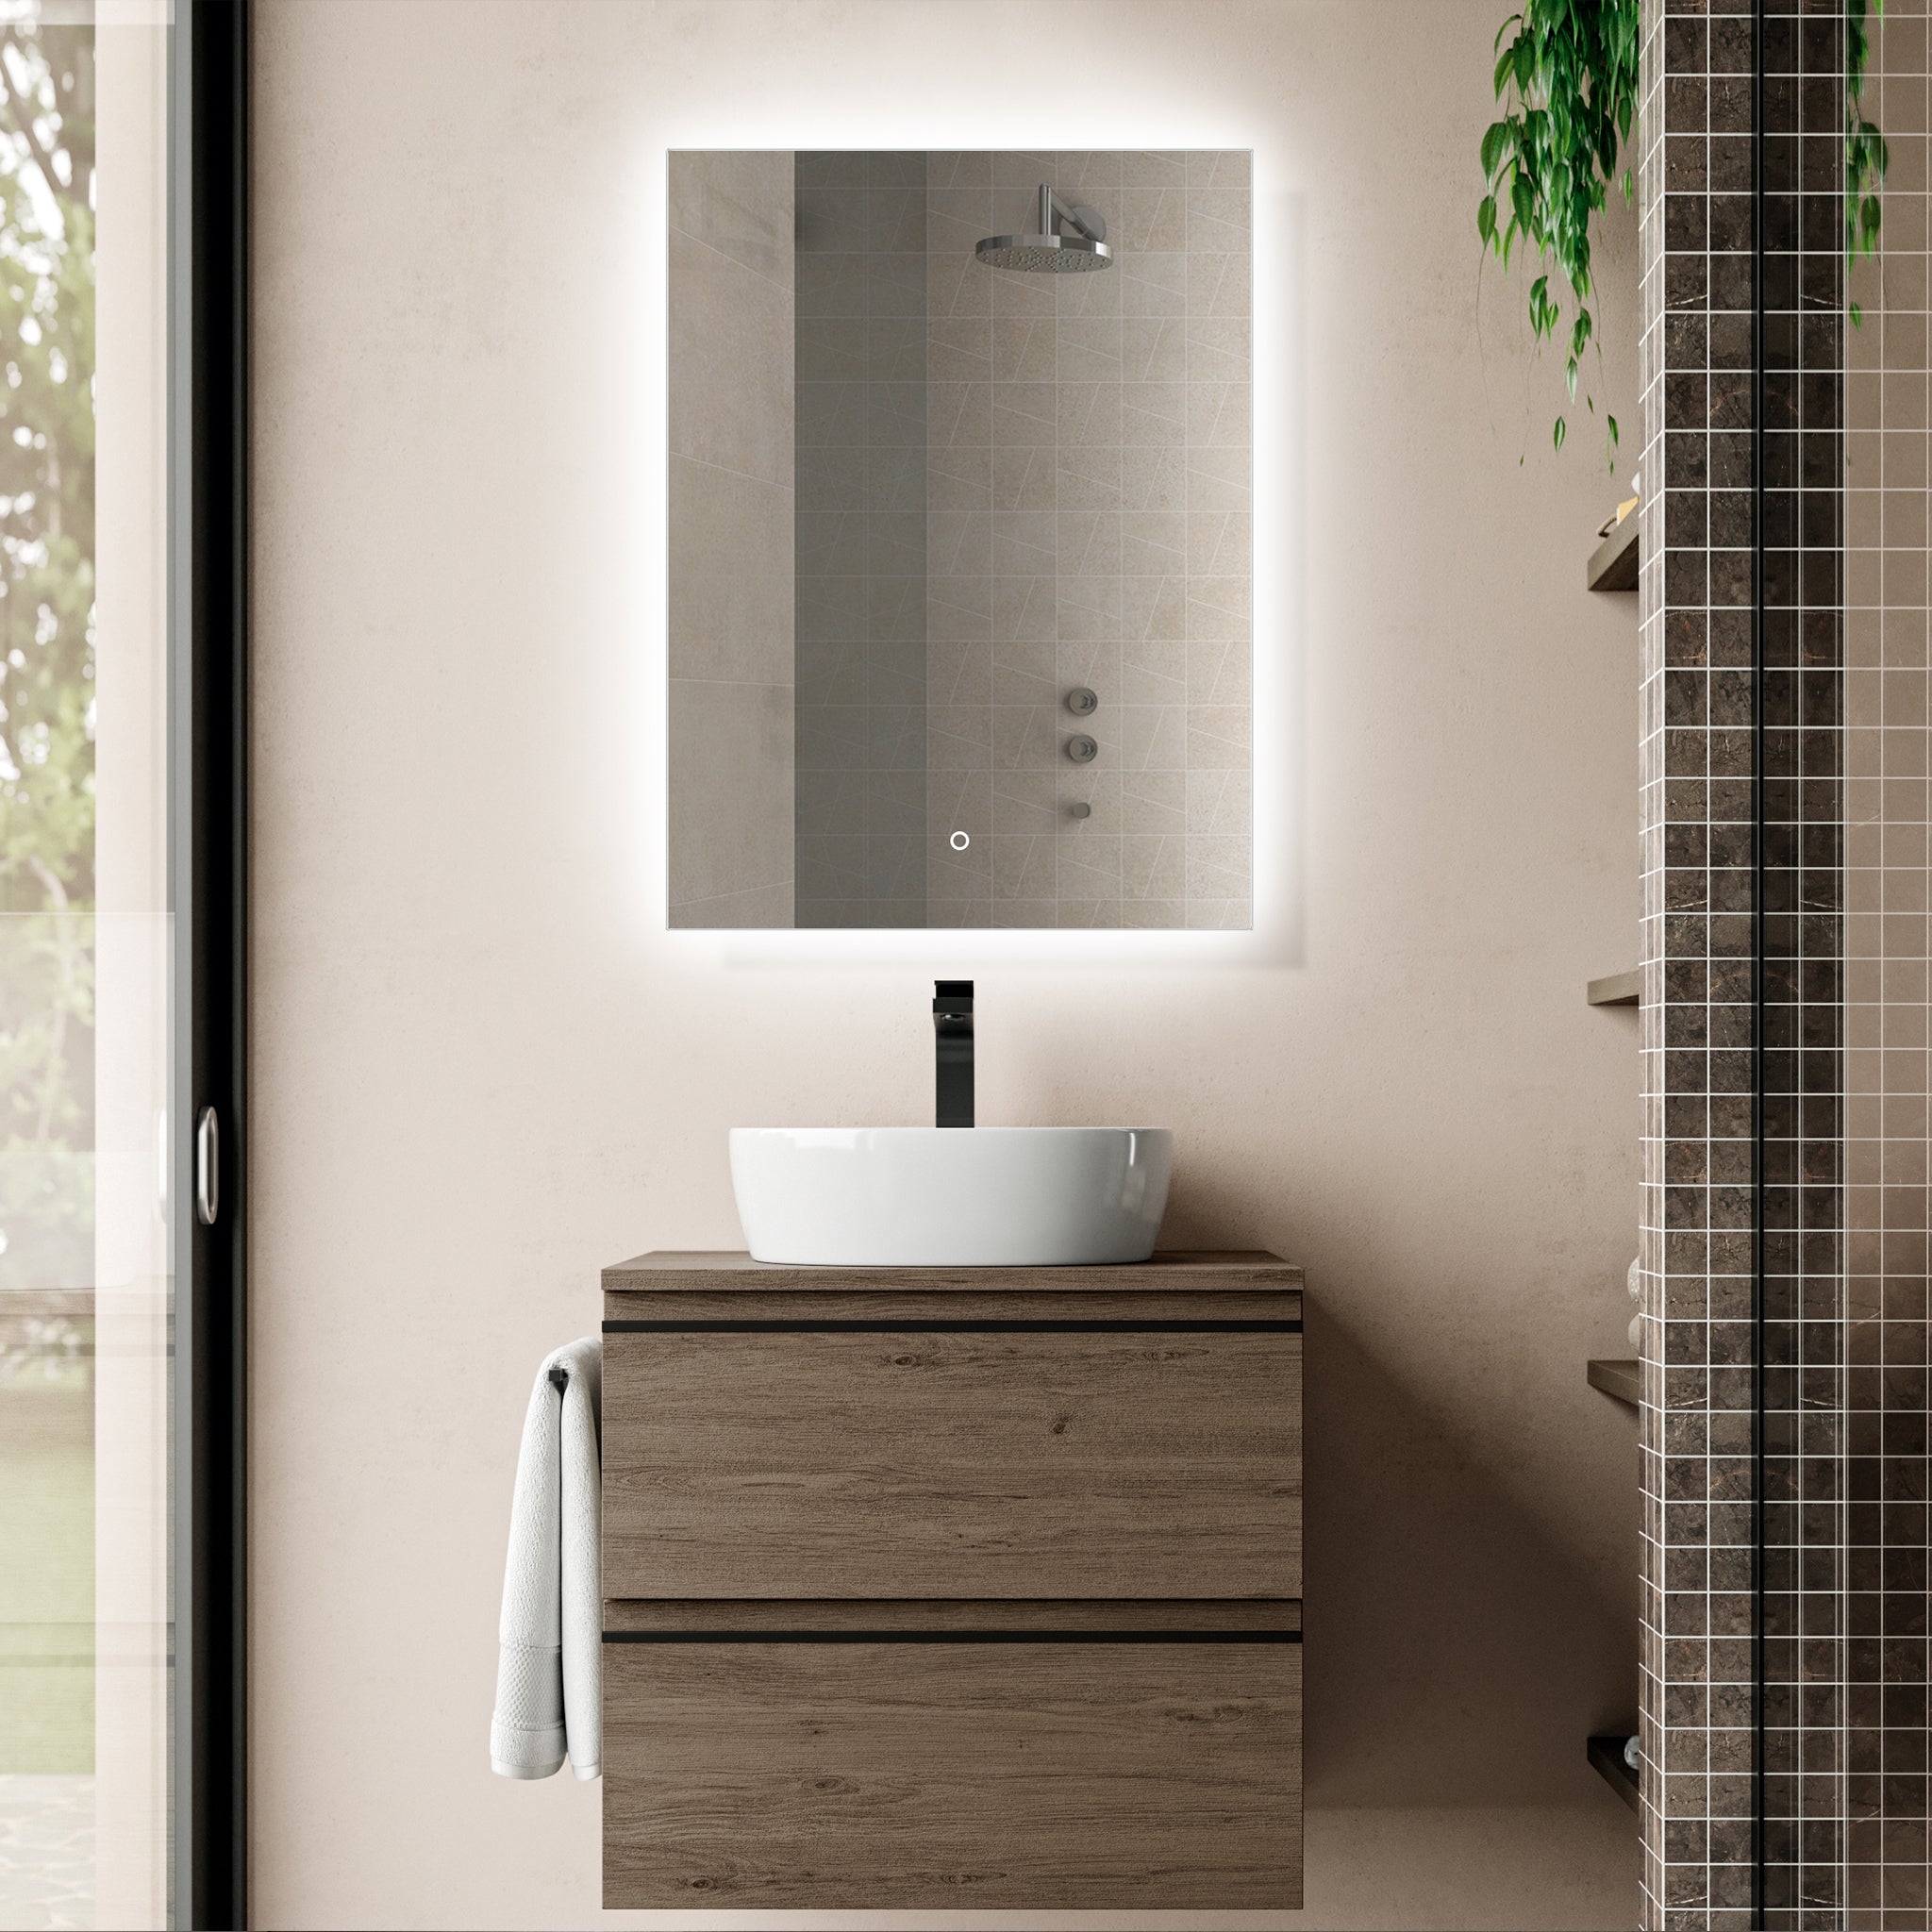 Aquamoon LED Mirror 4575 With Front Touch On/Off Botton, Square Frameless Corner Design With Back Ilumination 24W x 31H